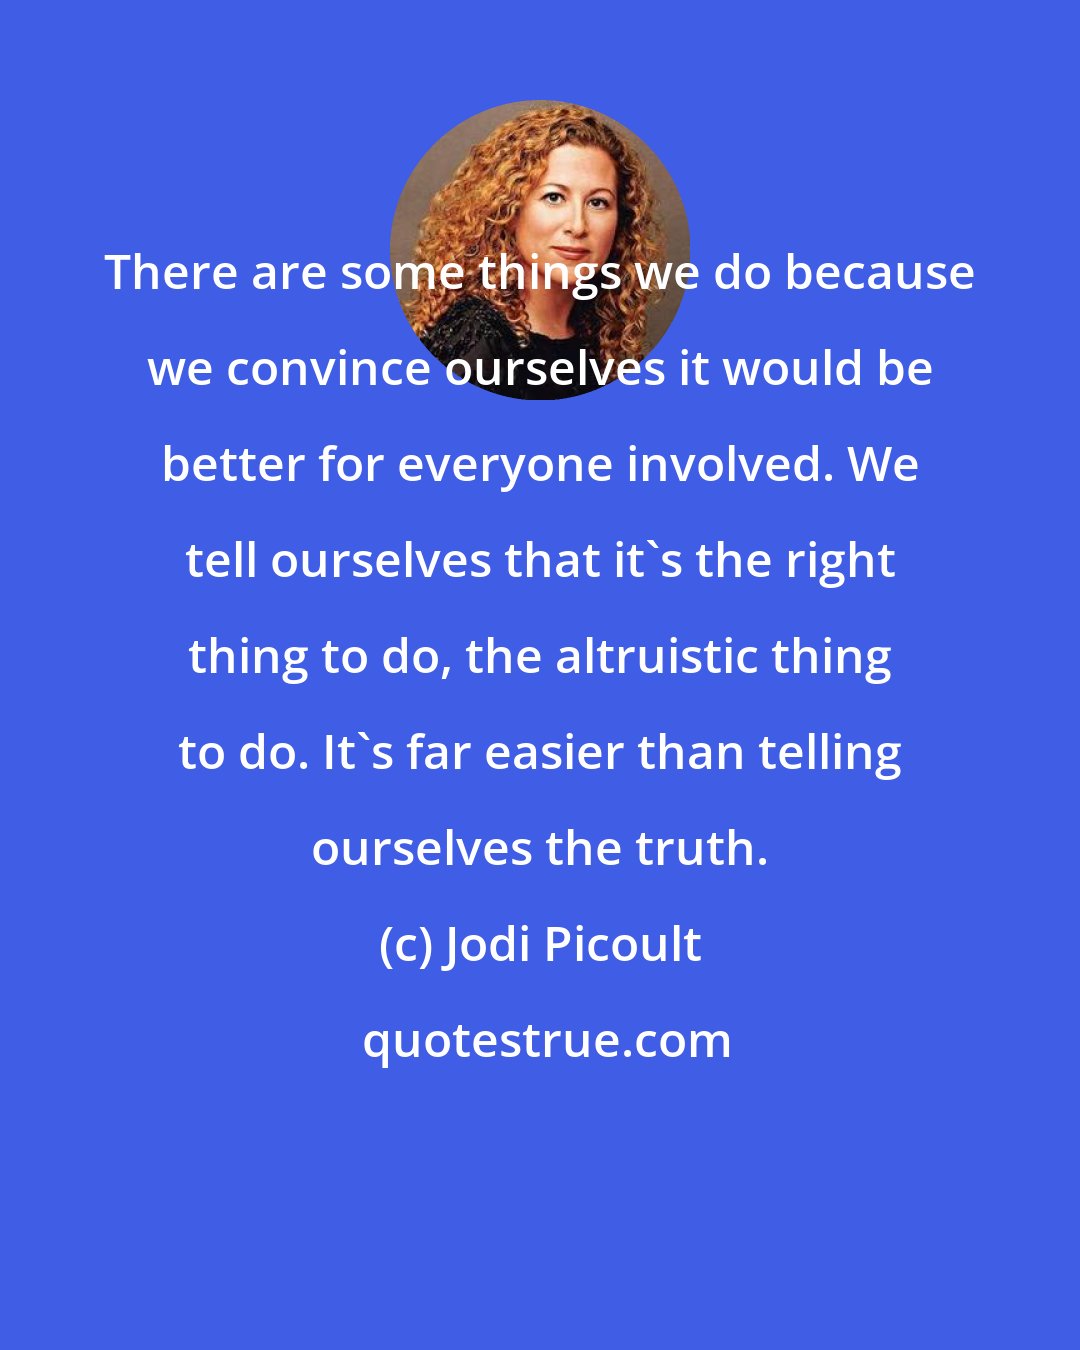 Jodi Picoult: There are some things we do because we convince ourselves it would be better for everyone involved. We tell ourselves that it's the right thing to do, the altruistic thing to do. It's far easier than telling ourselves the truth.